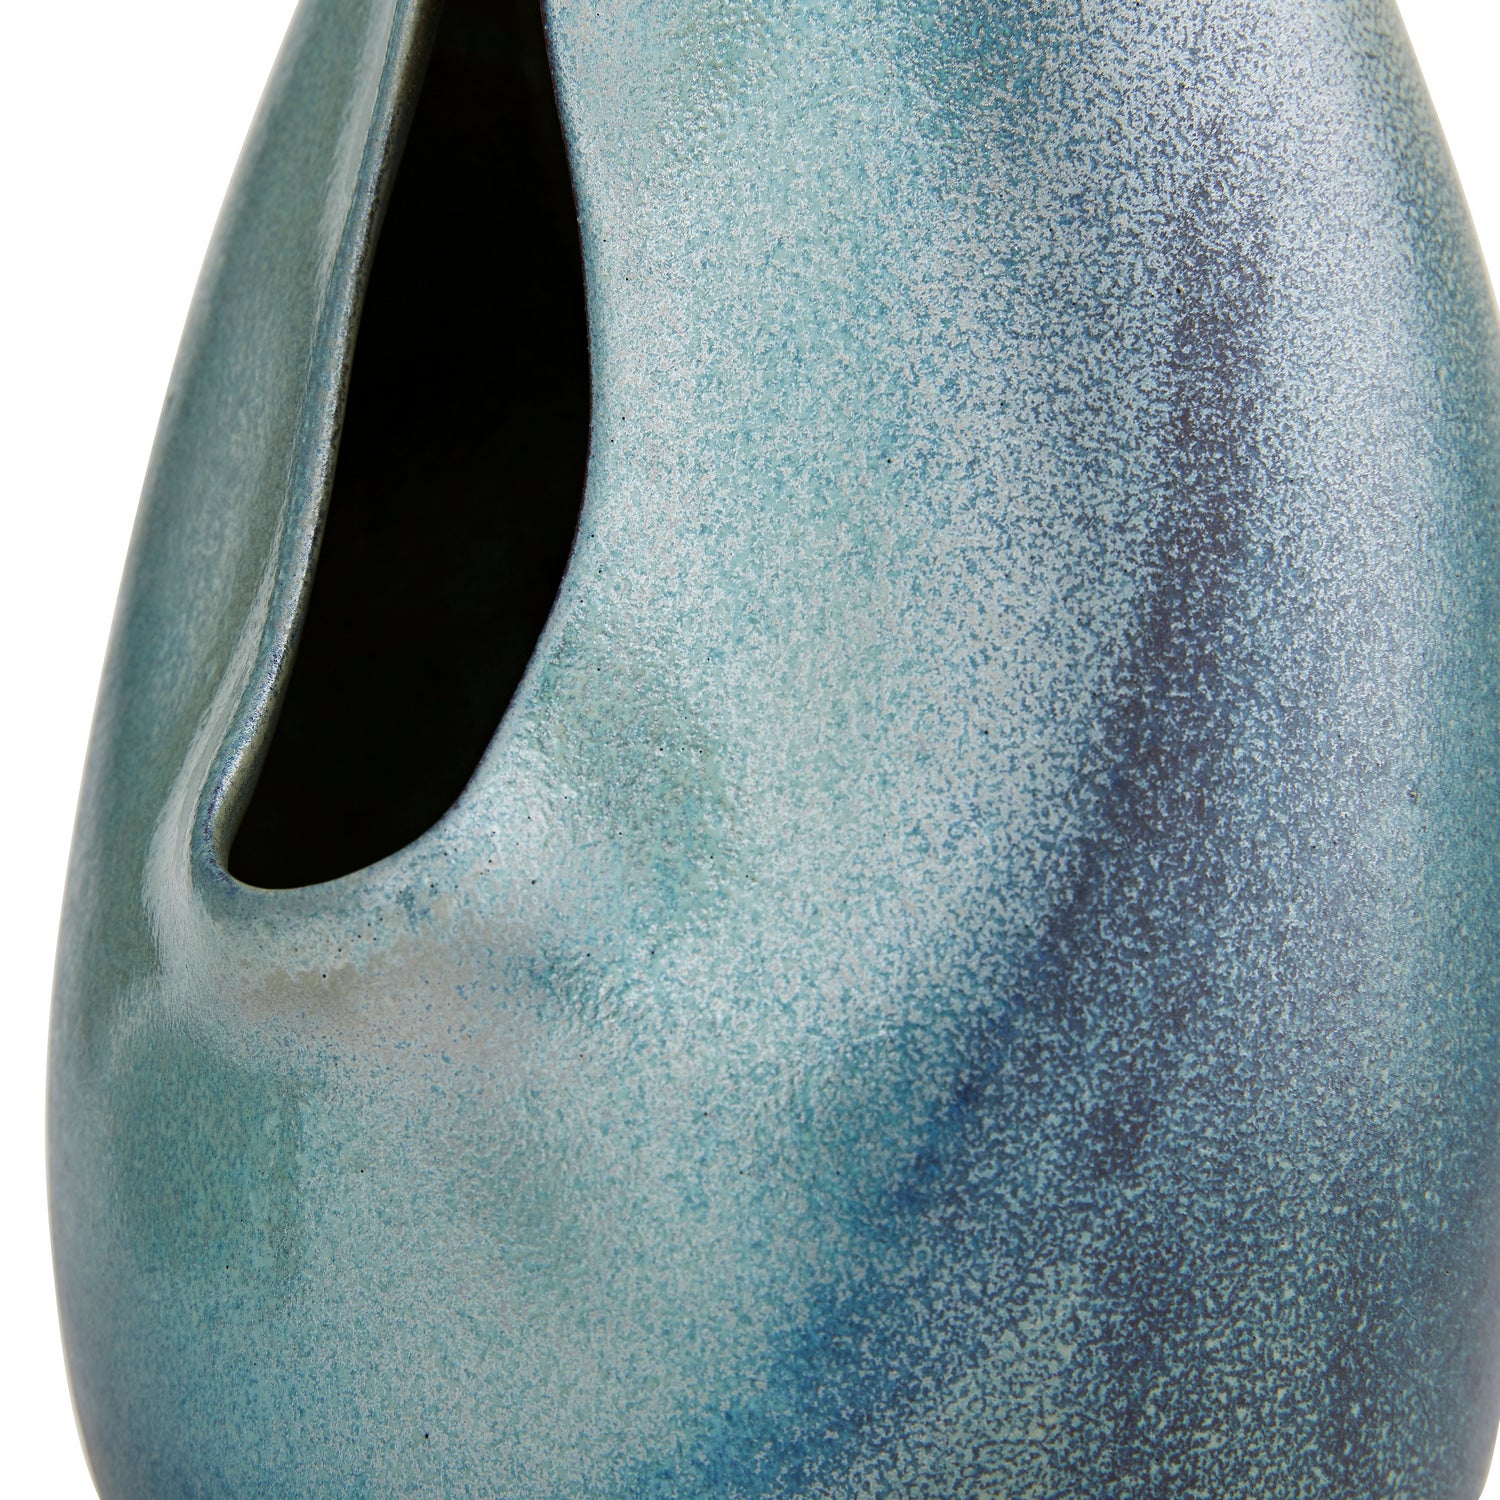 Vases, Set of 2 from the Isaac collection in Waterfall Reactive finish